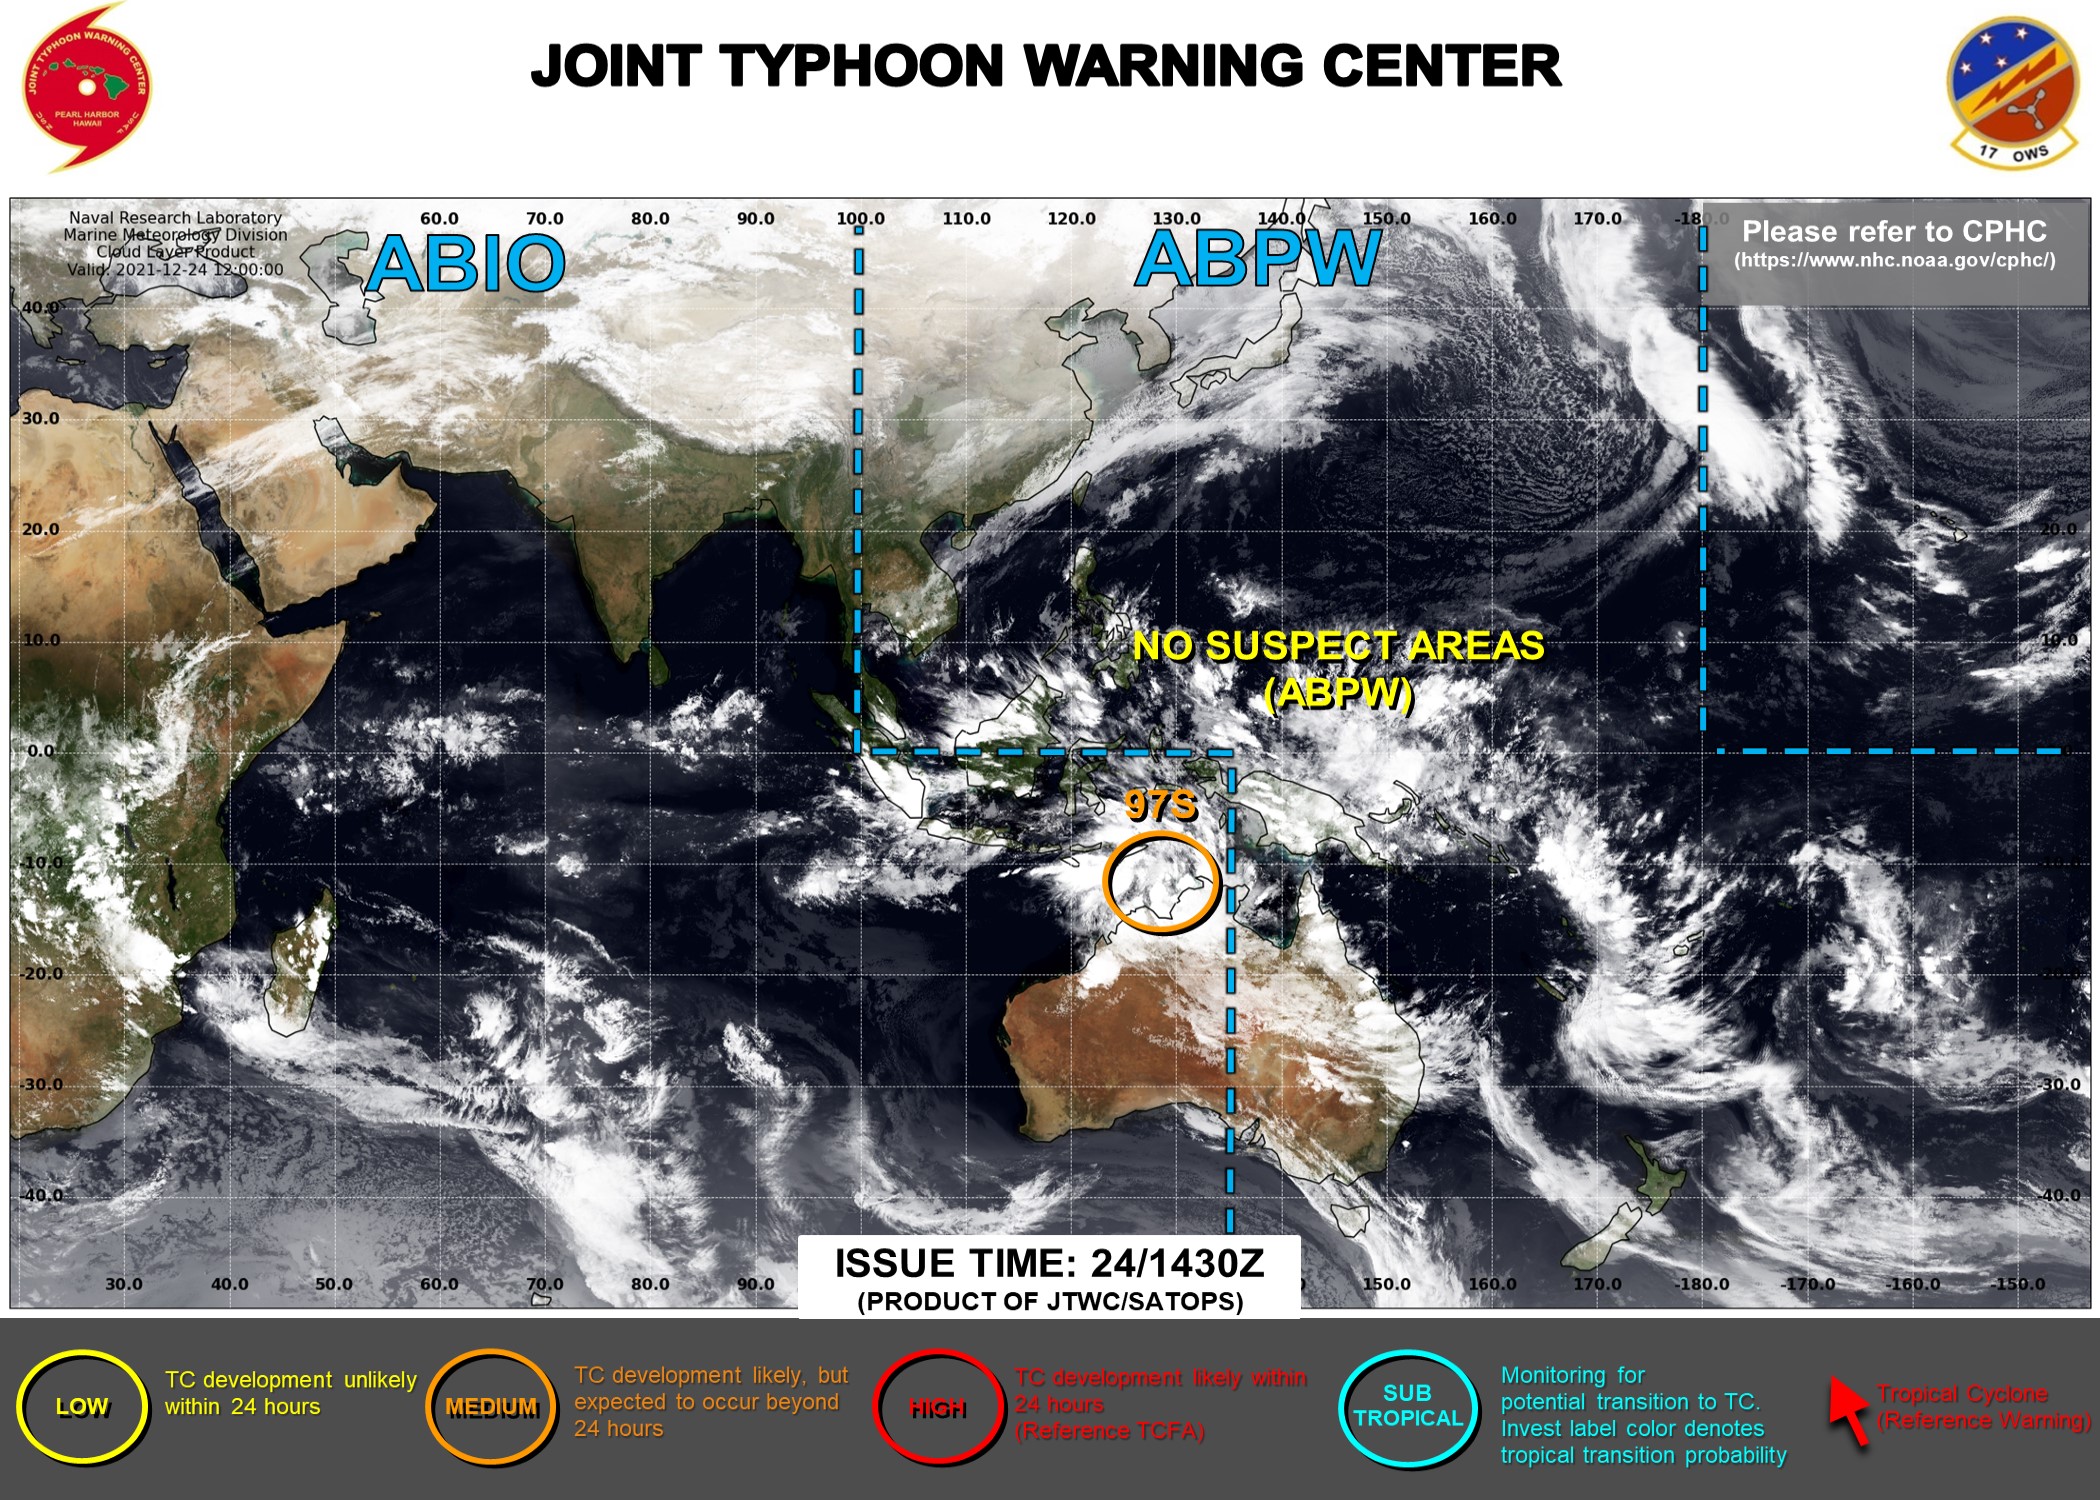 JTWC IS ISSUING 3HOURLY SATELLITE BULLETINS ON 97S.